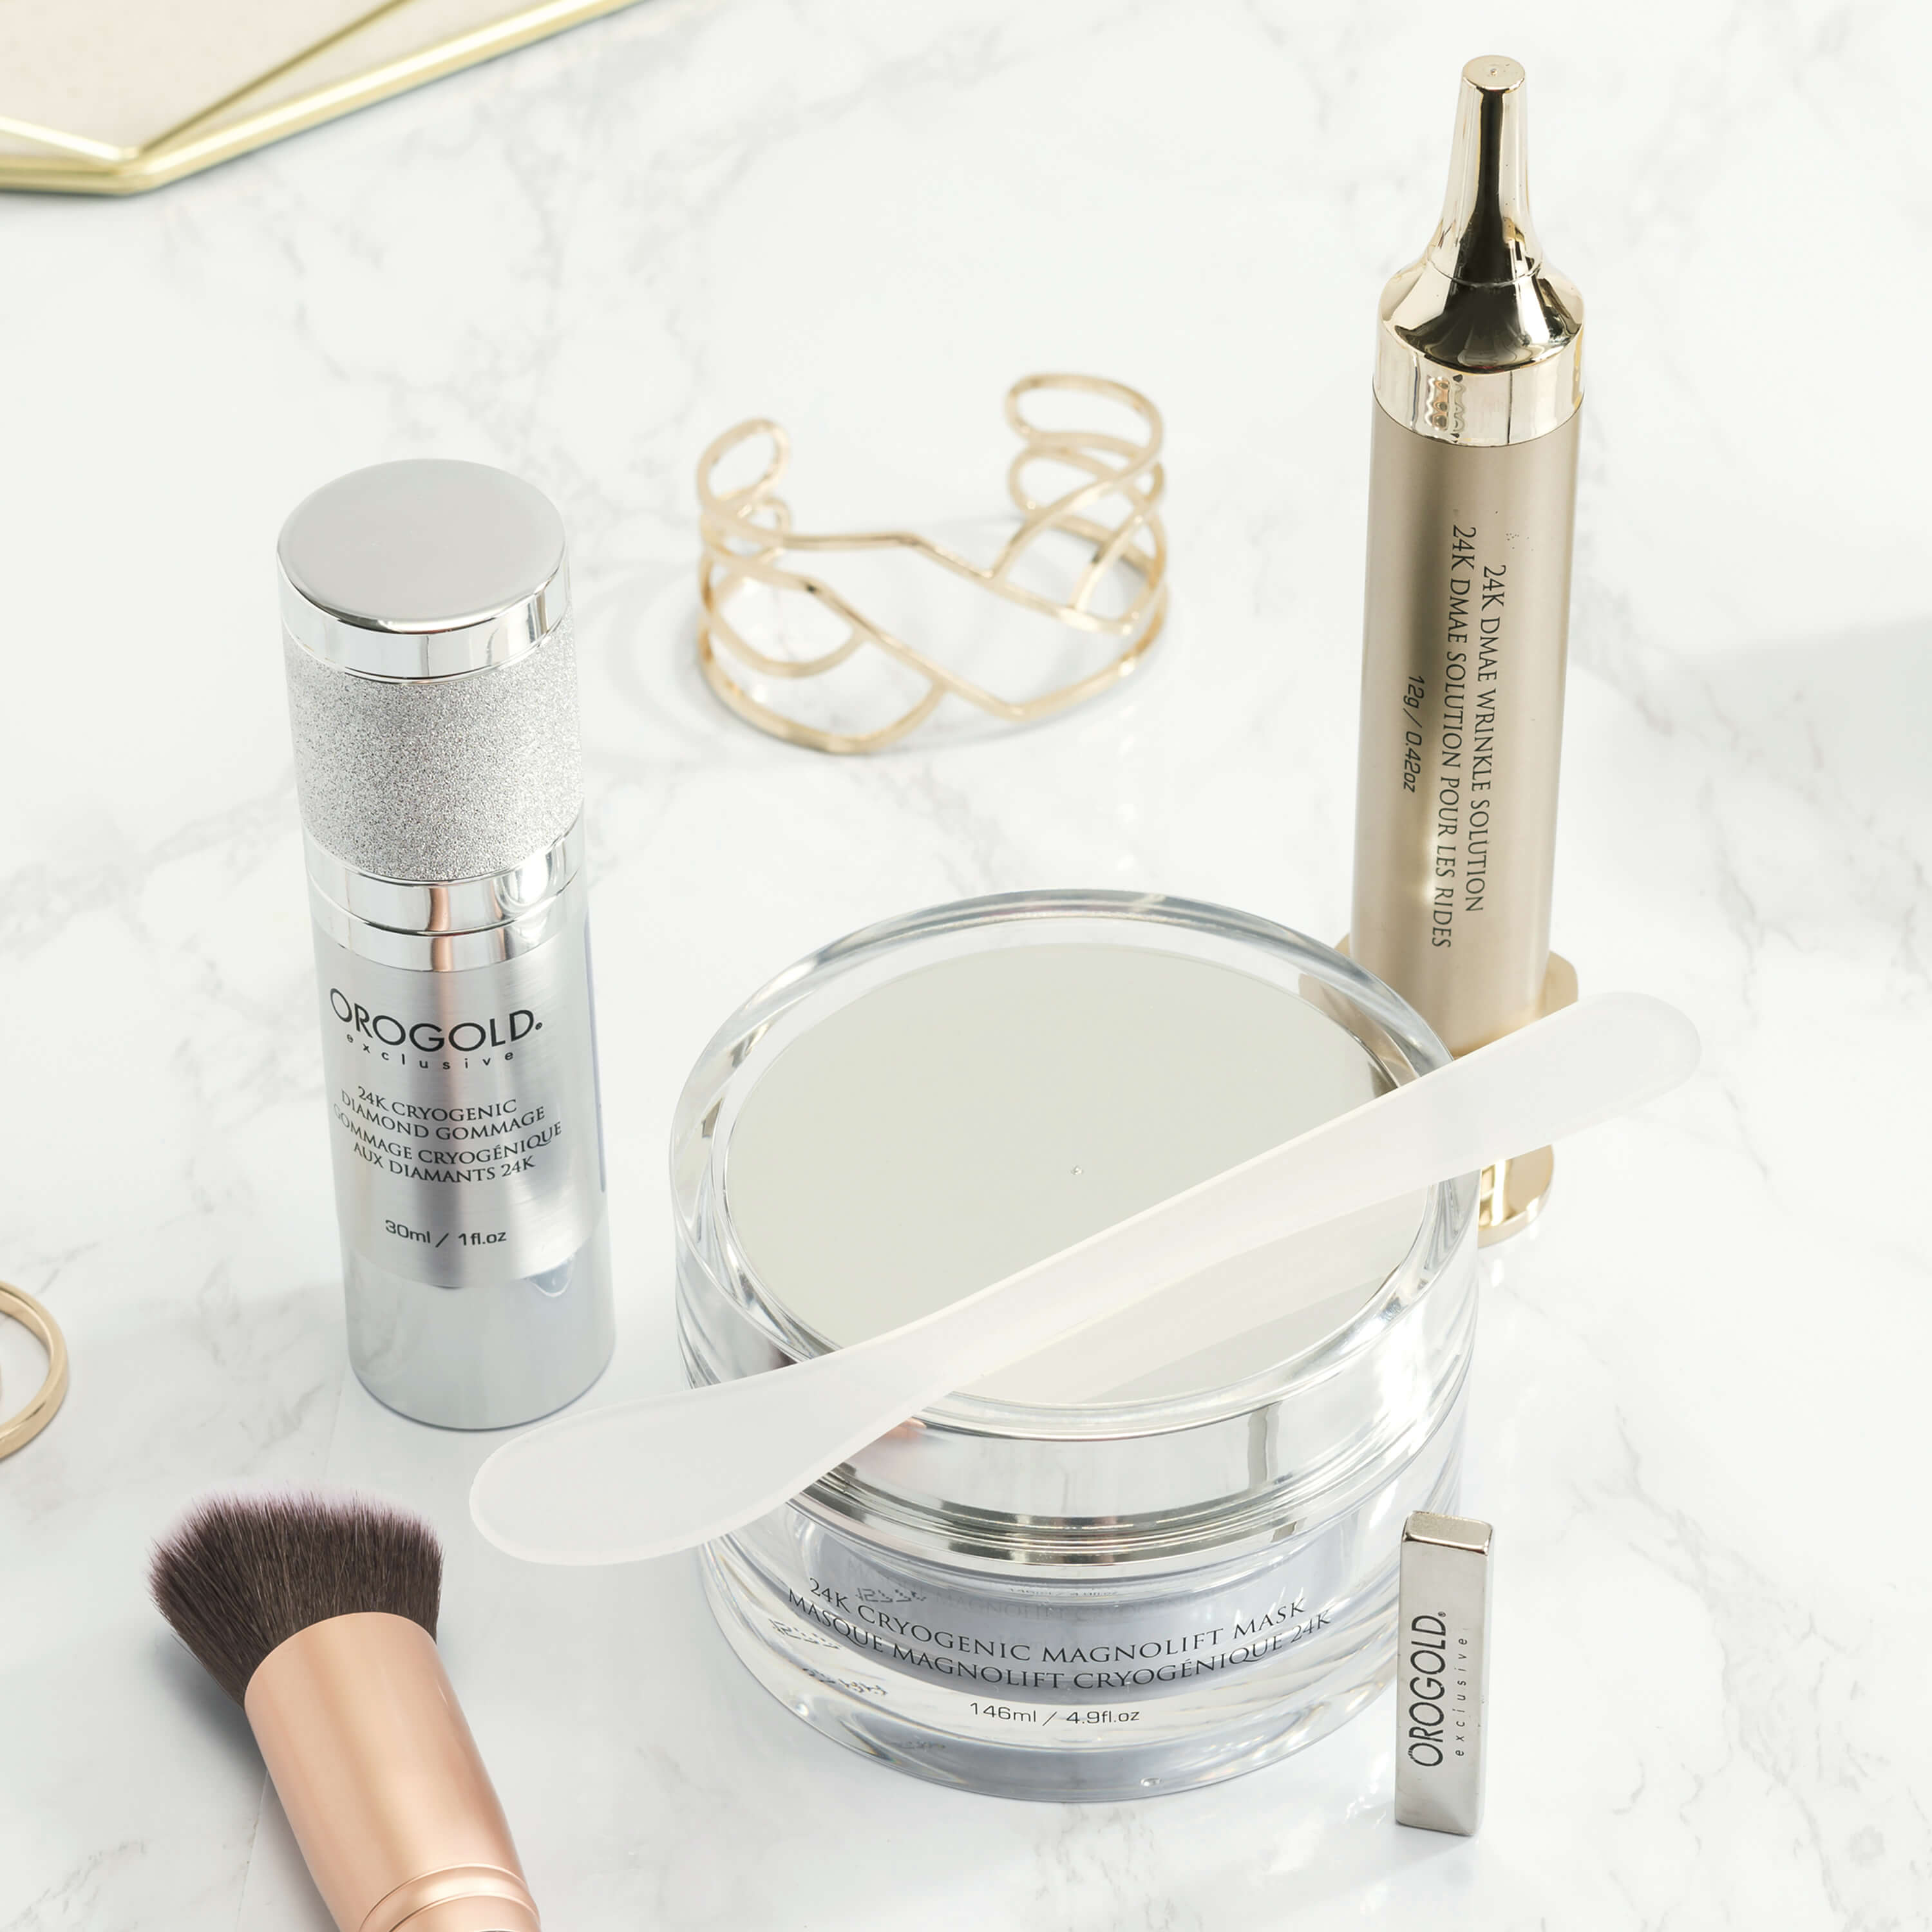 Is Orogold Cosmetics Worth the Hype?